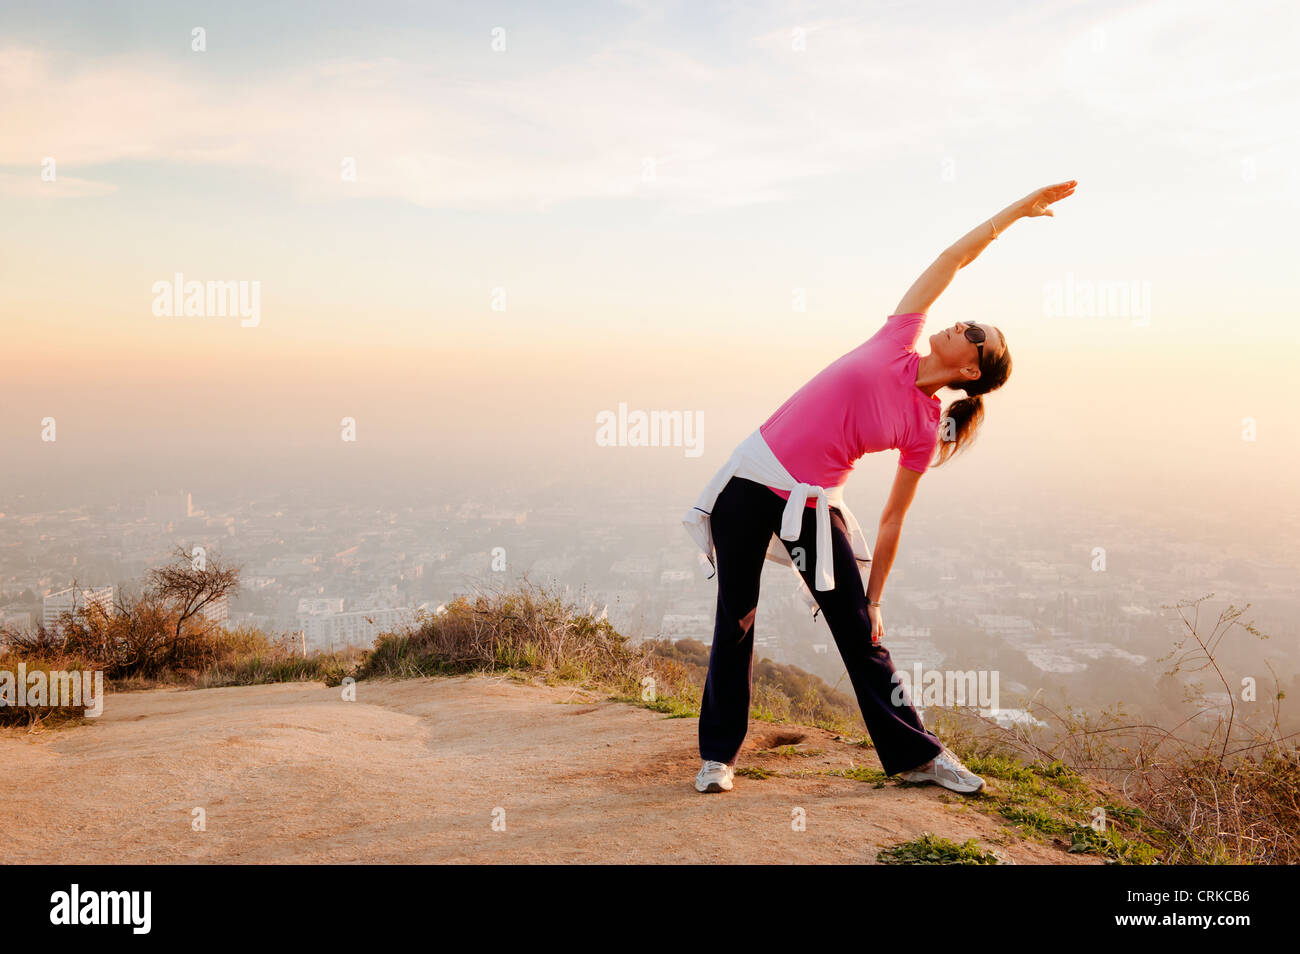 Woman stretching on hilltop Stock Photo